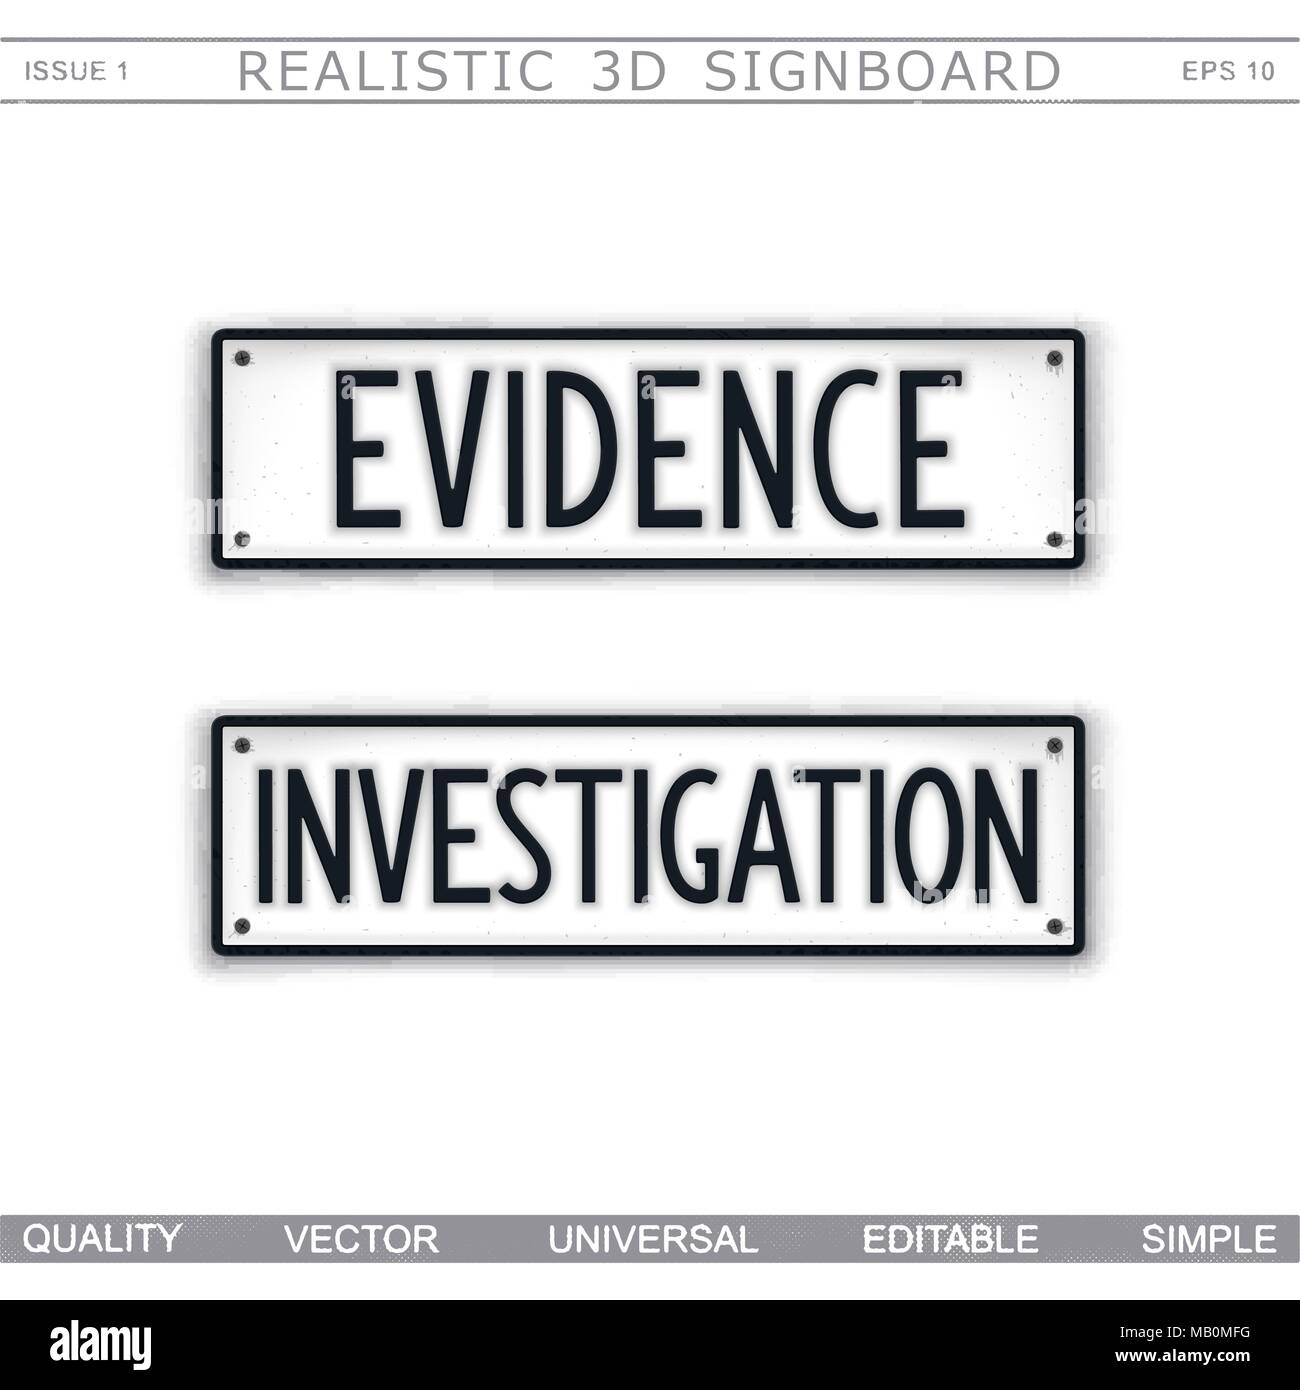 Signboard design. Evidence. Investigation. Car license plate stylized. Vector elements Stock Vector